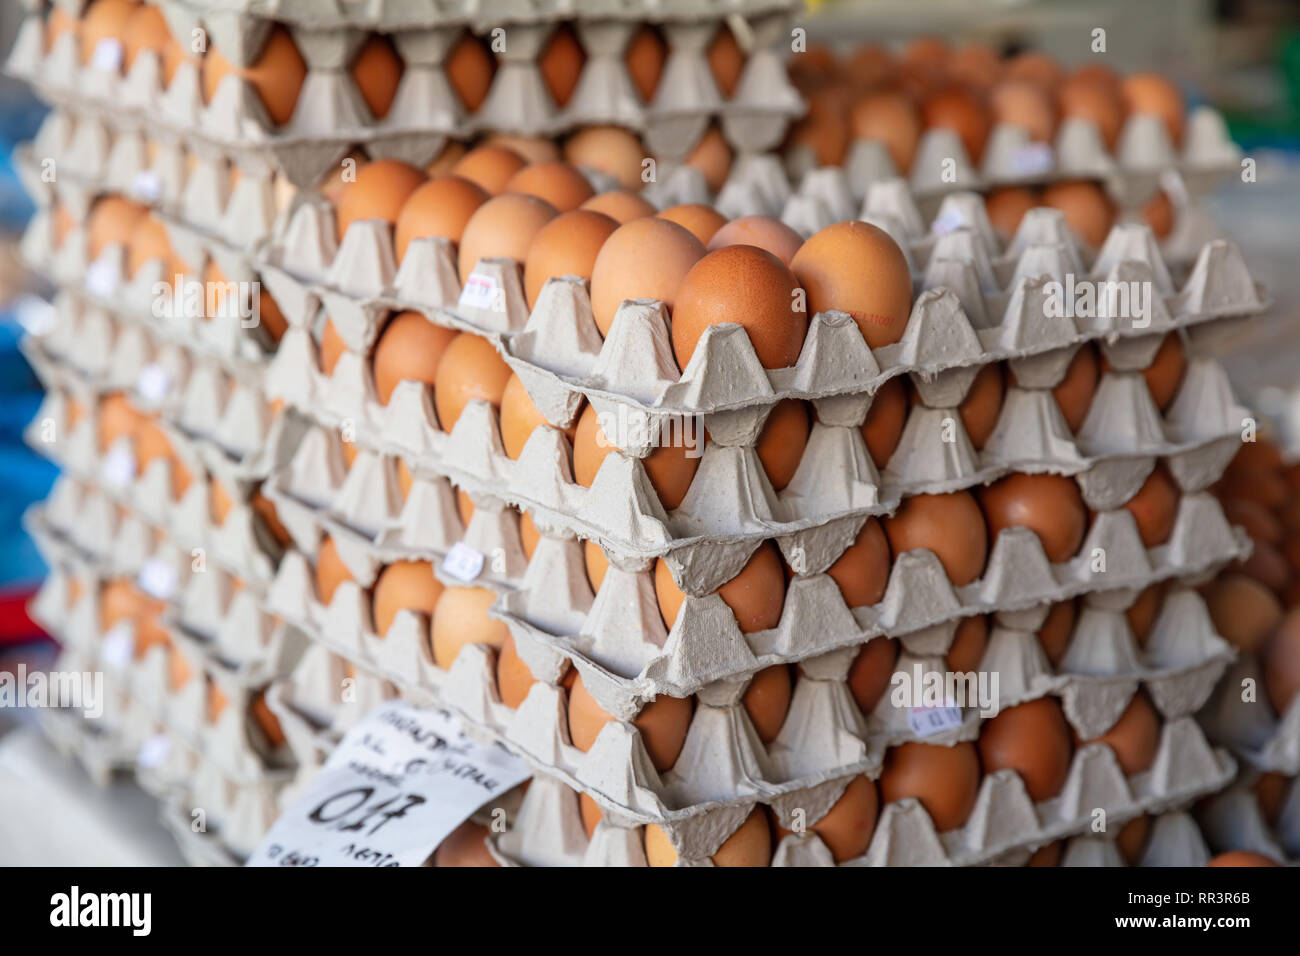 Chicken eggs in the market. Carton packages with brown eggs stacked background, texture. Closeup view Stock Photo